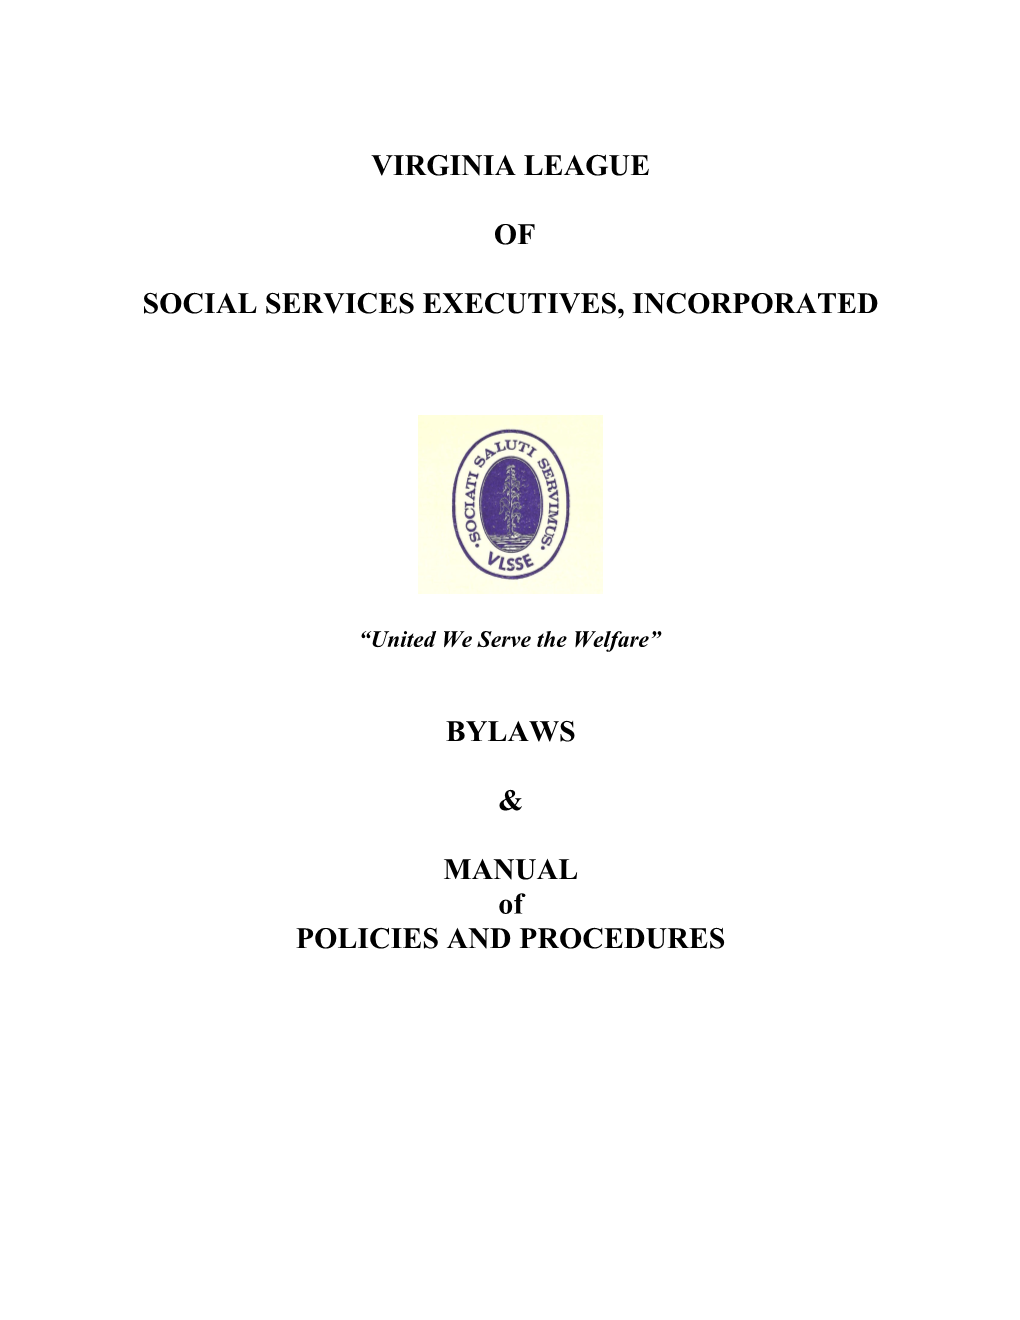 Social Services Executives, Incorporated